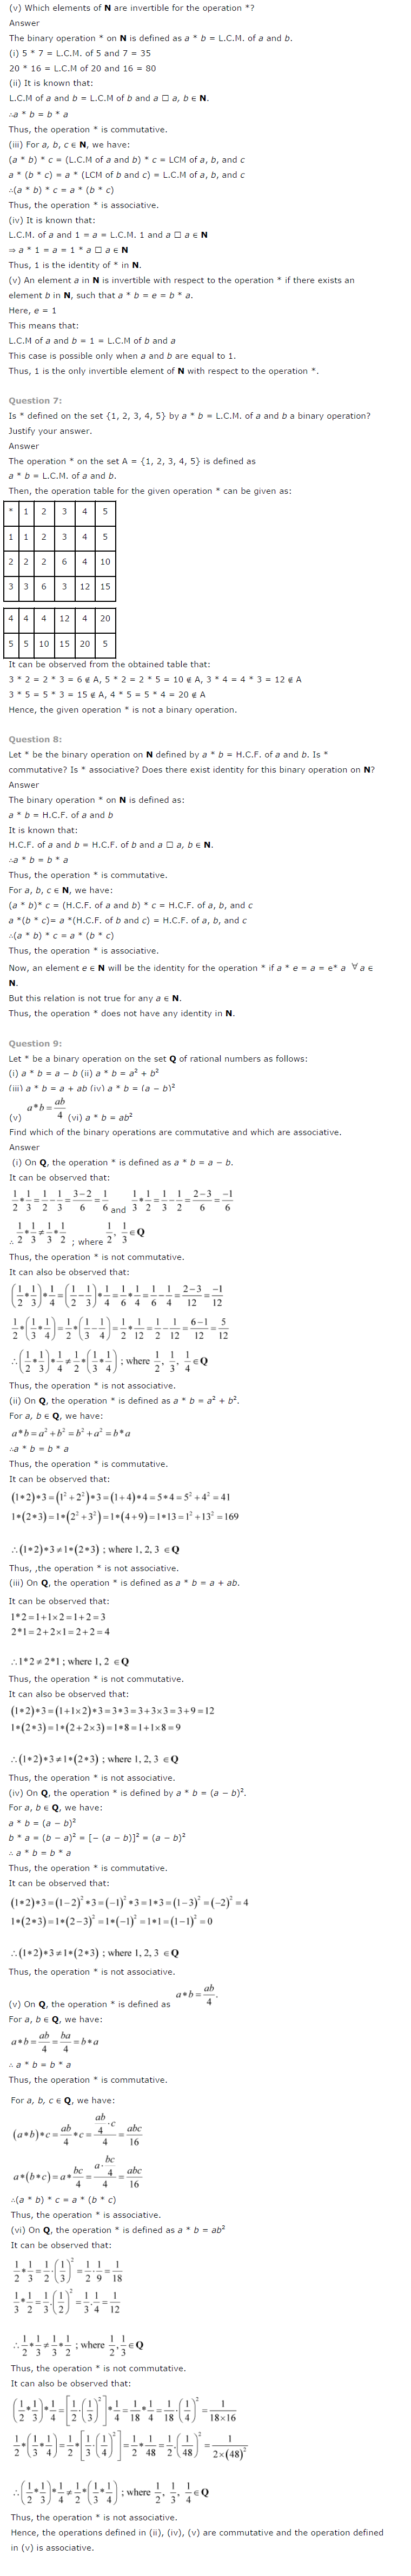 NCERT Solutions For Class 12 Maths Chapter 1 Relations and Functions 9